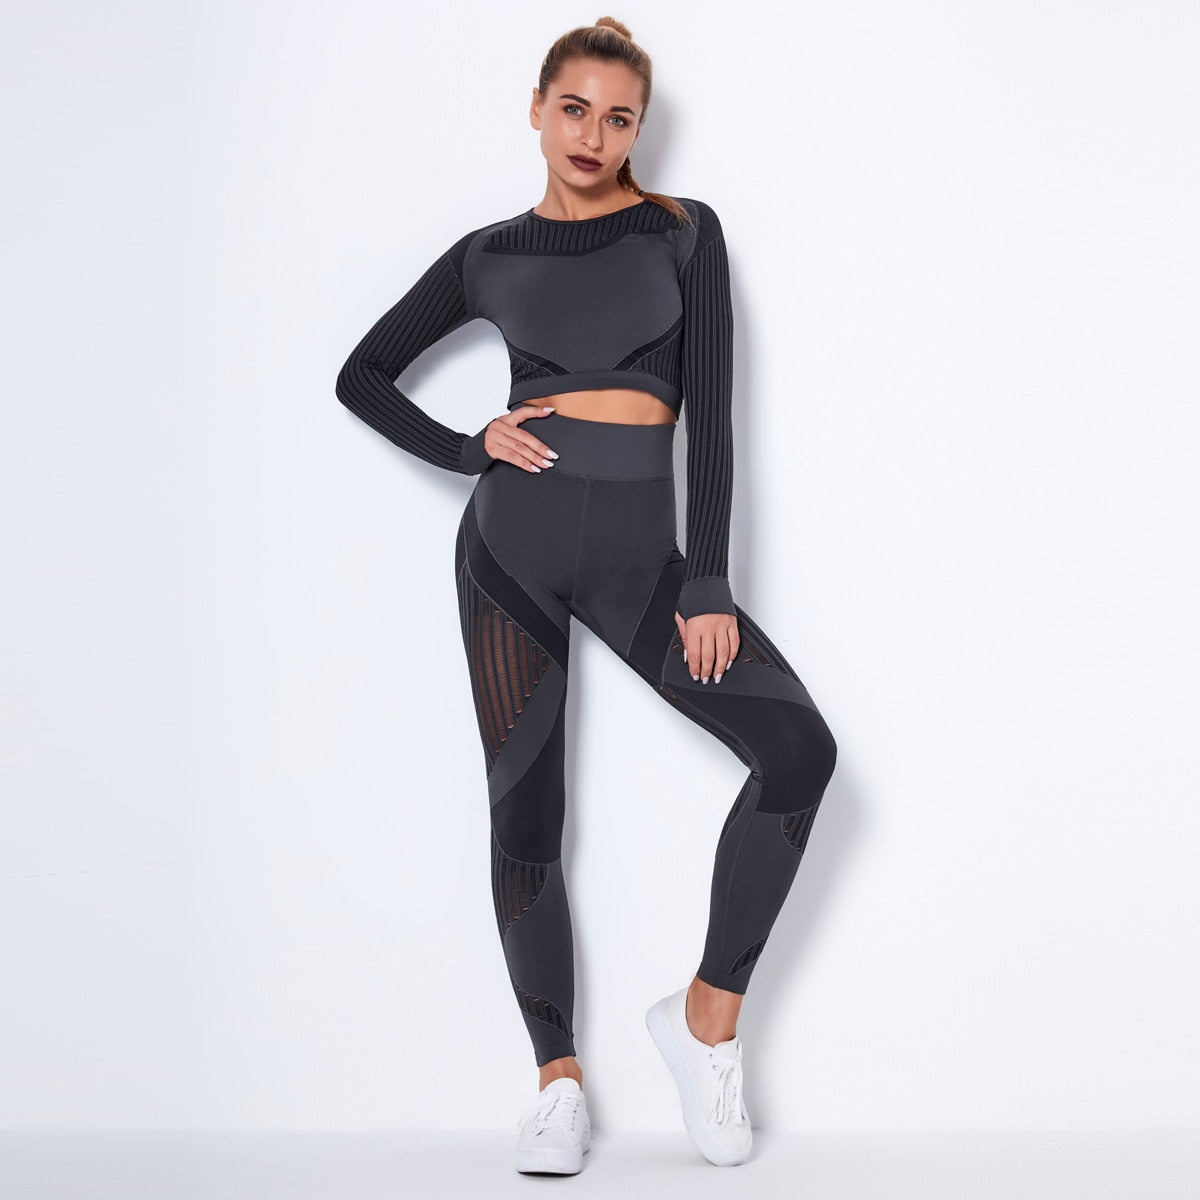 2 Piece Seamless Sports Sets workout yoga set Women&#39;s Suit for fitness leggings Vital Sportswear Gym clothing 2021 Tracksuits